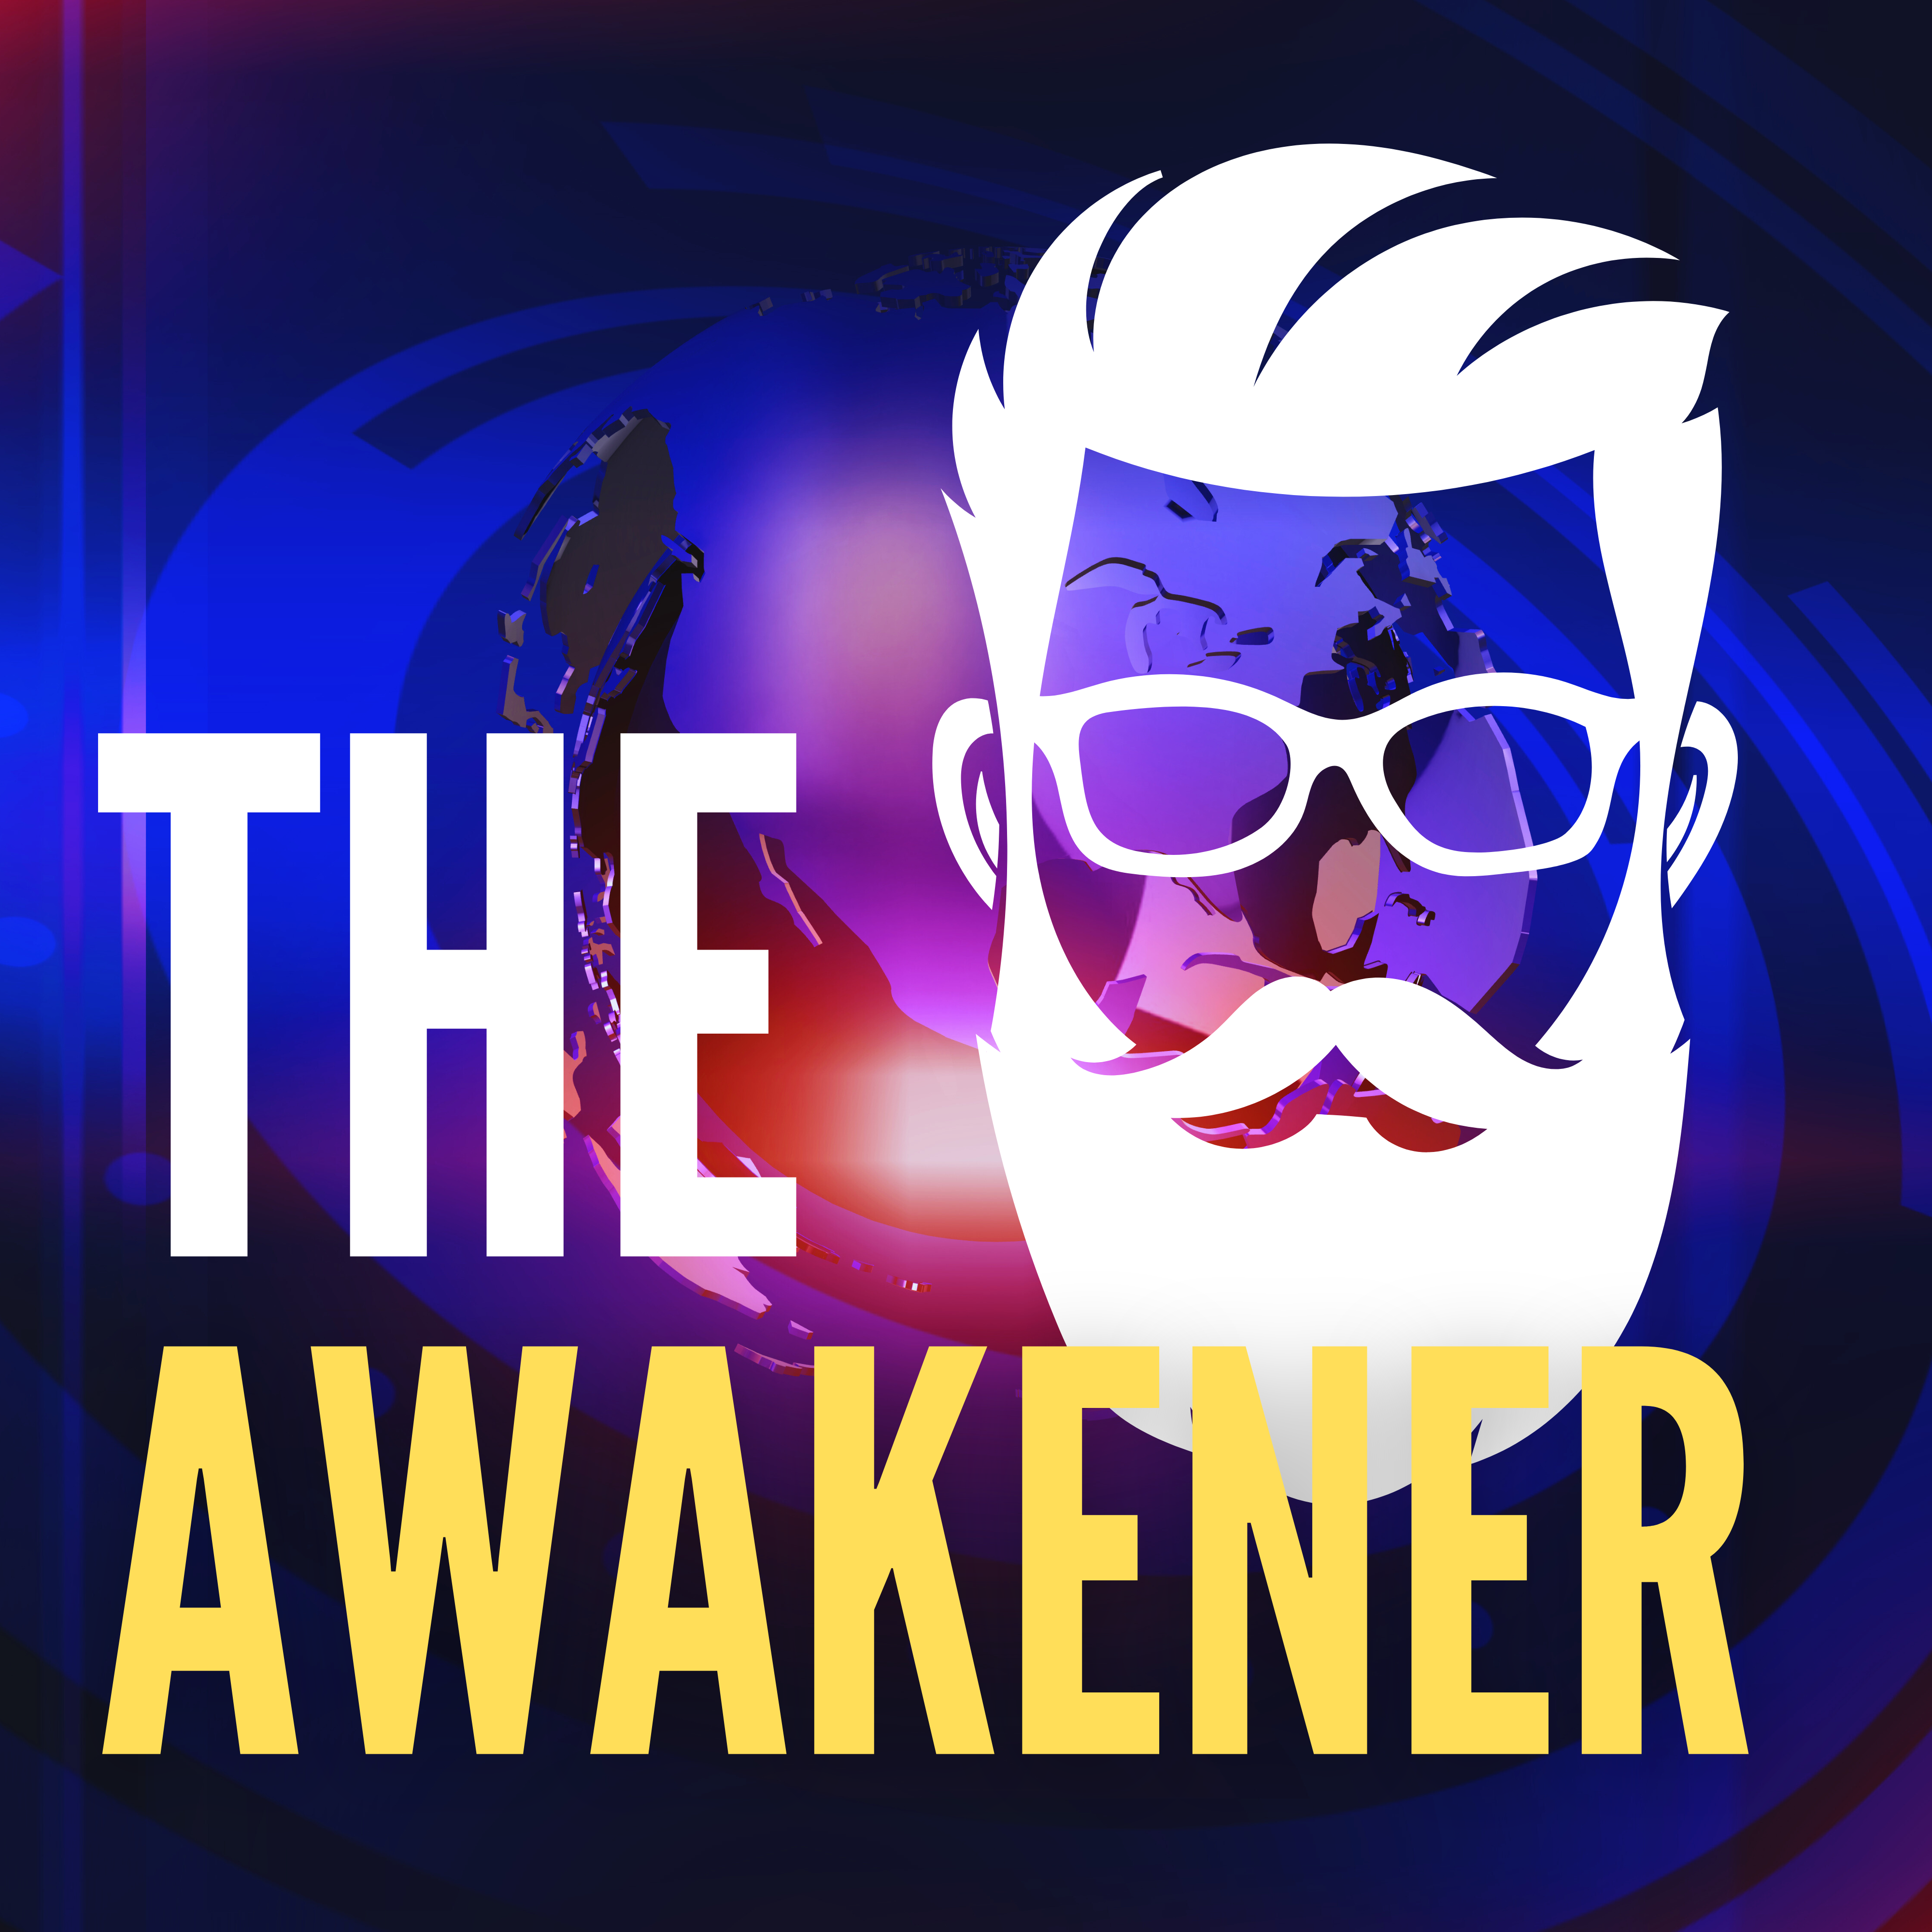 The Awakener and The Insider about the political landscape